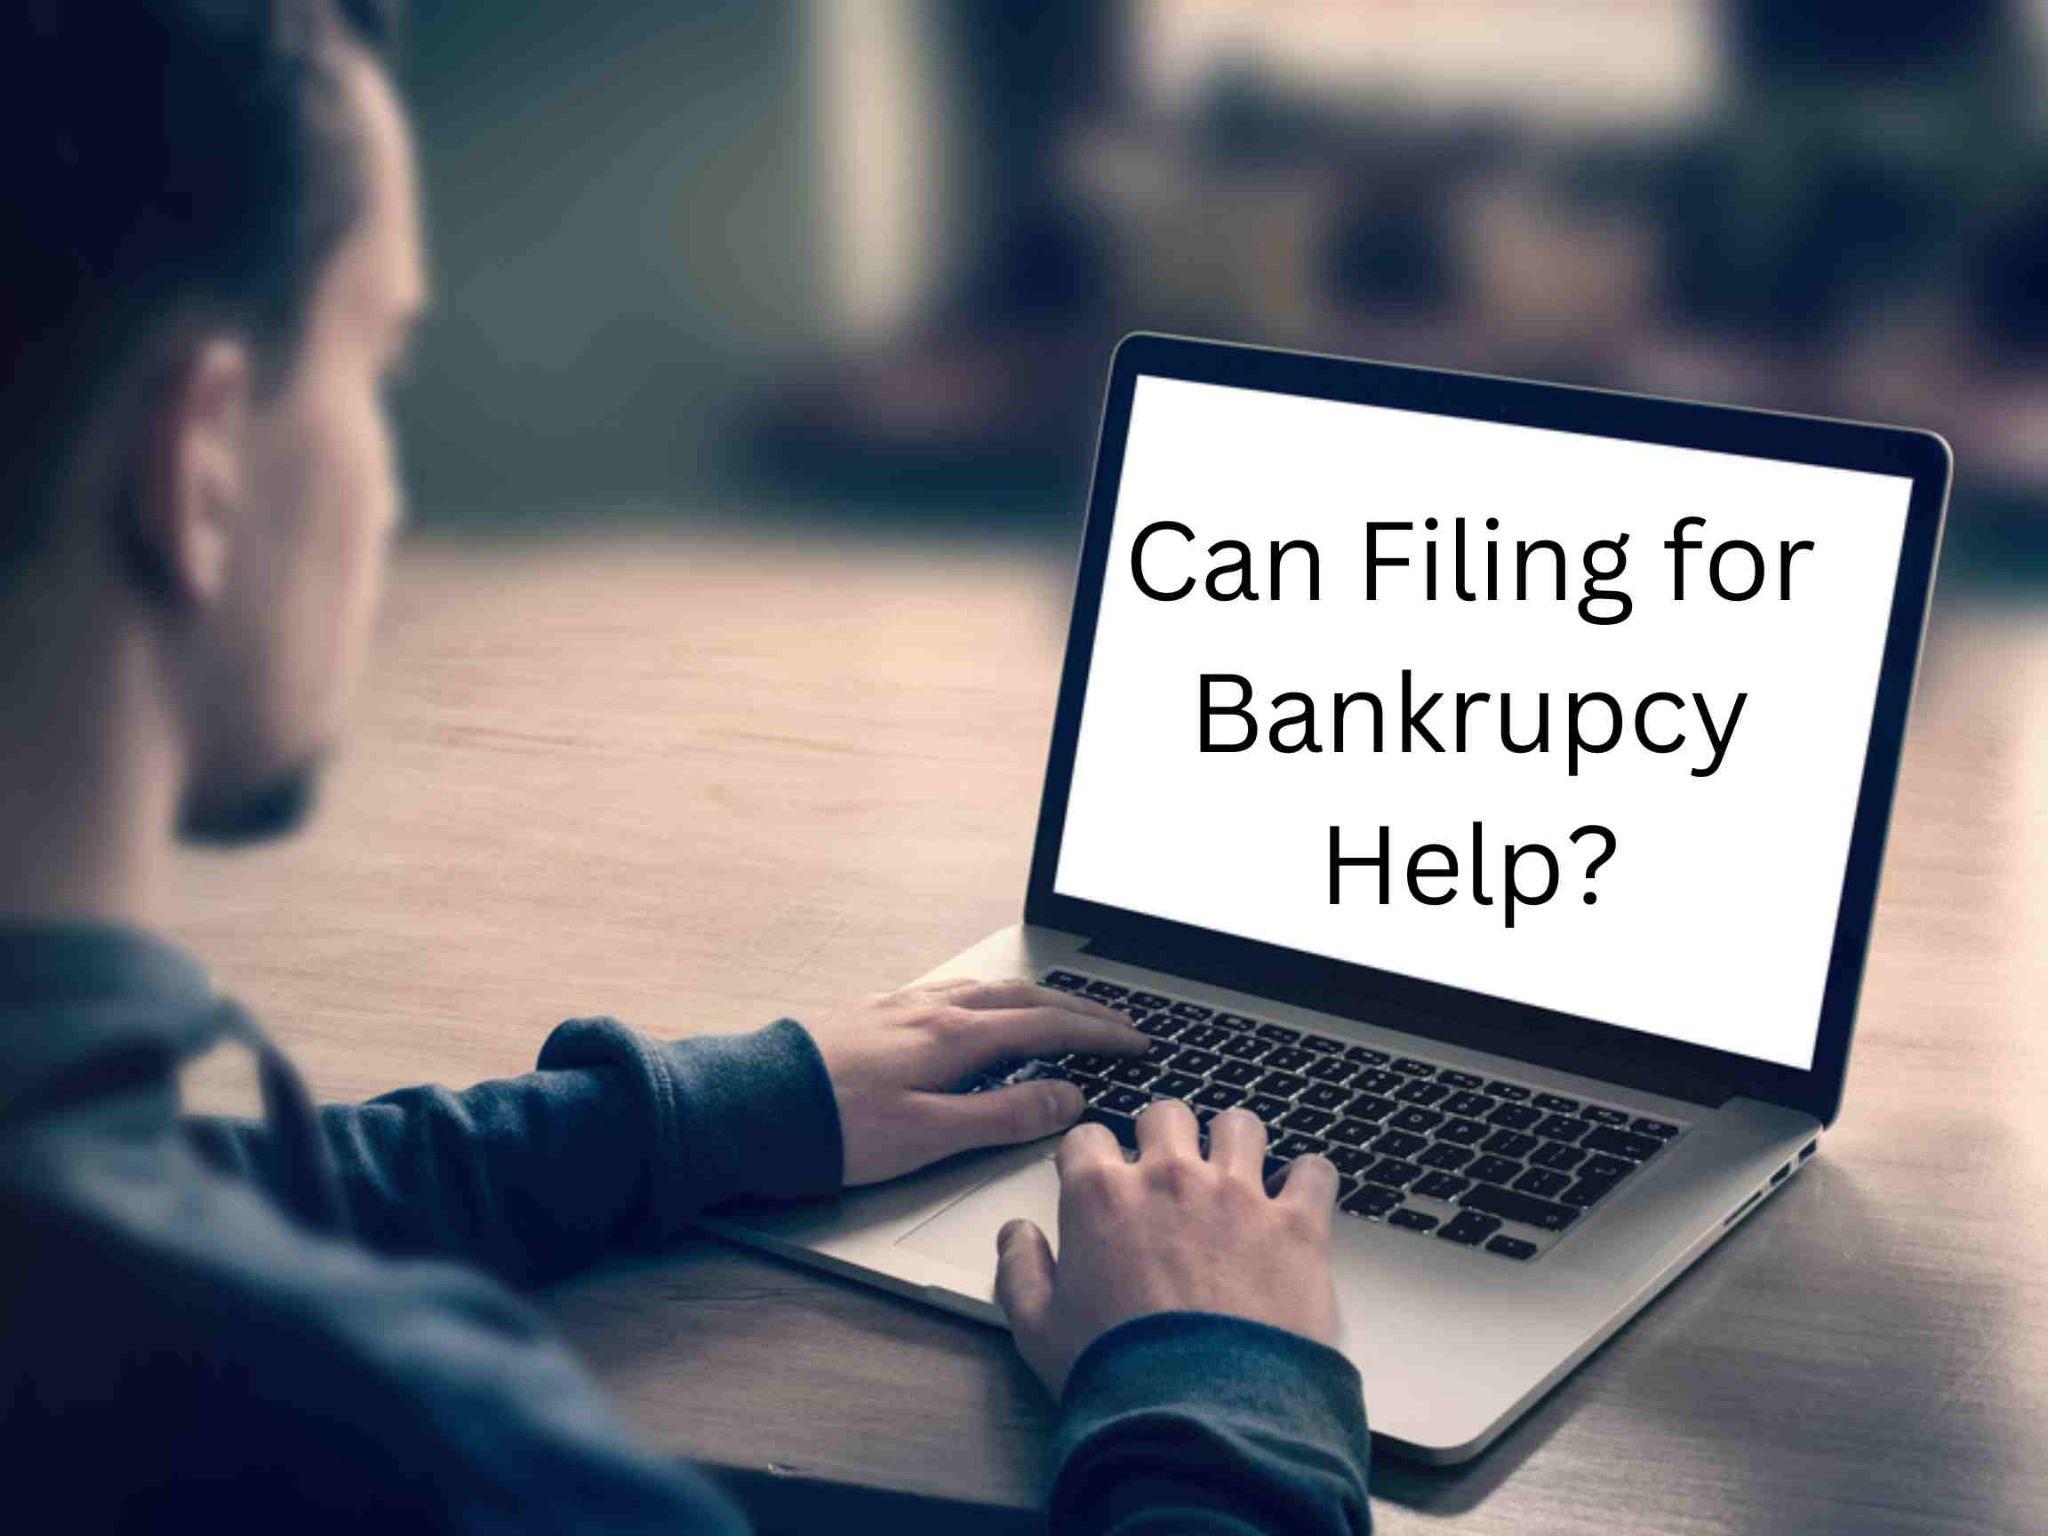 A person typing on a laptop with a screen displaying the text "Can Filing for Bankruptcy Help?.